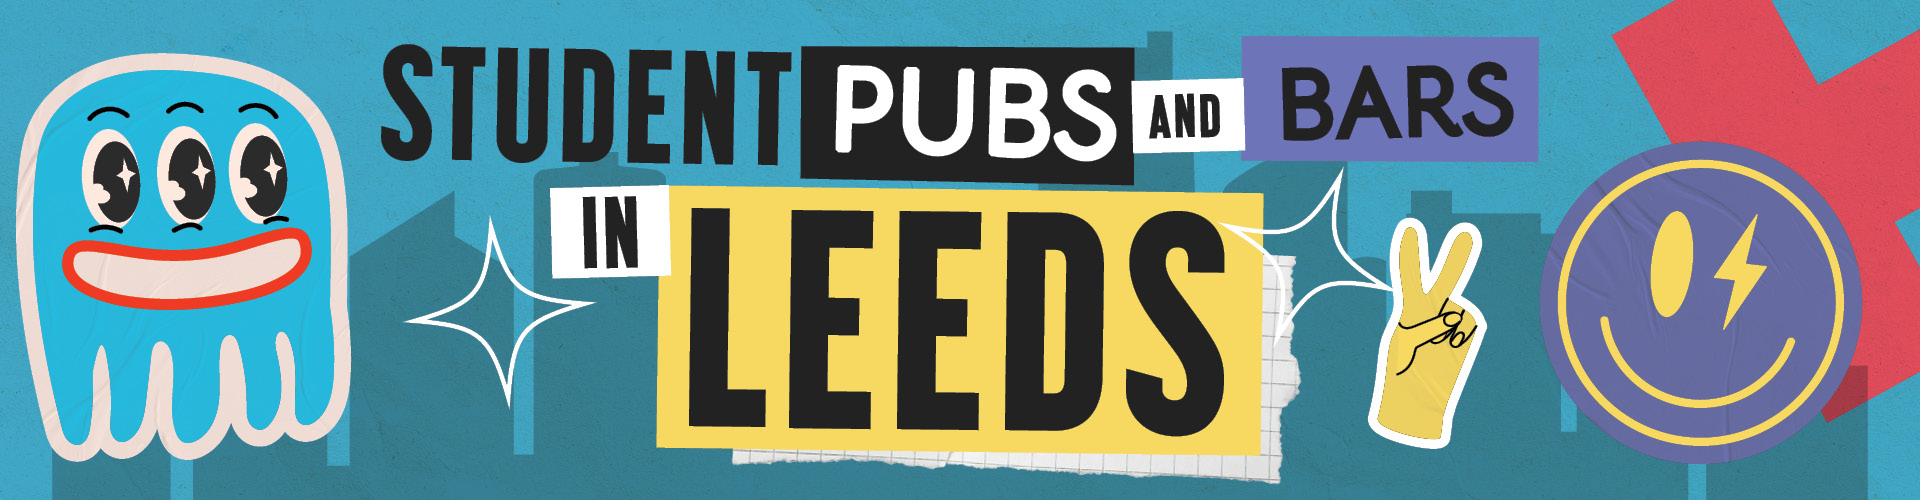 Student pubs and bars in Leeds